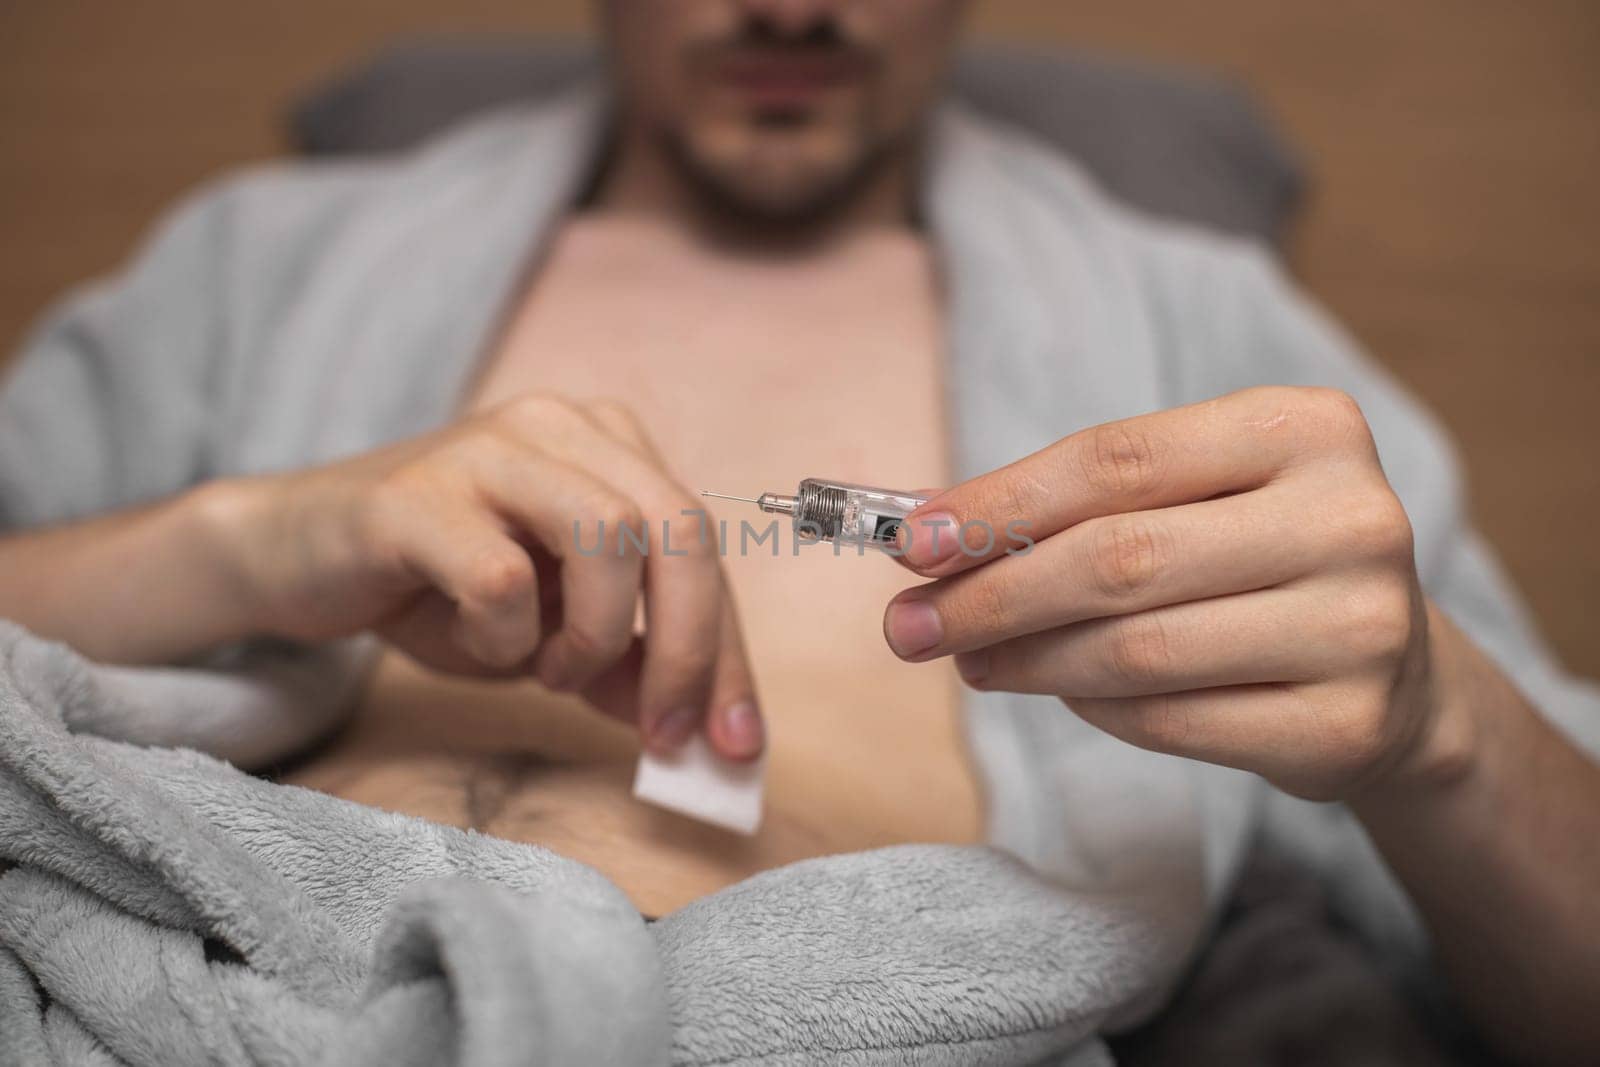 Step 4.Hands of a young caucasian man in a gray robe with a bared belly hold a syringe with a needle and medicinal liquid for an injection,lying on a bed,side view close-up.Concept step by step instructions for making an injection.